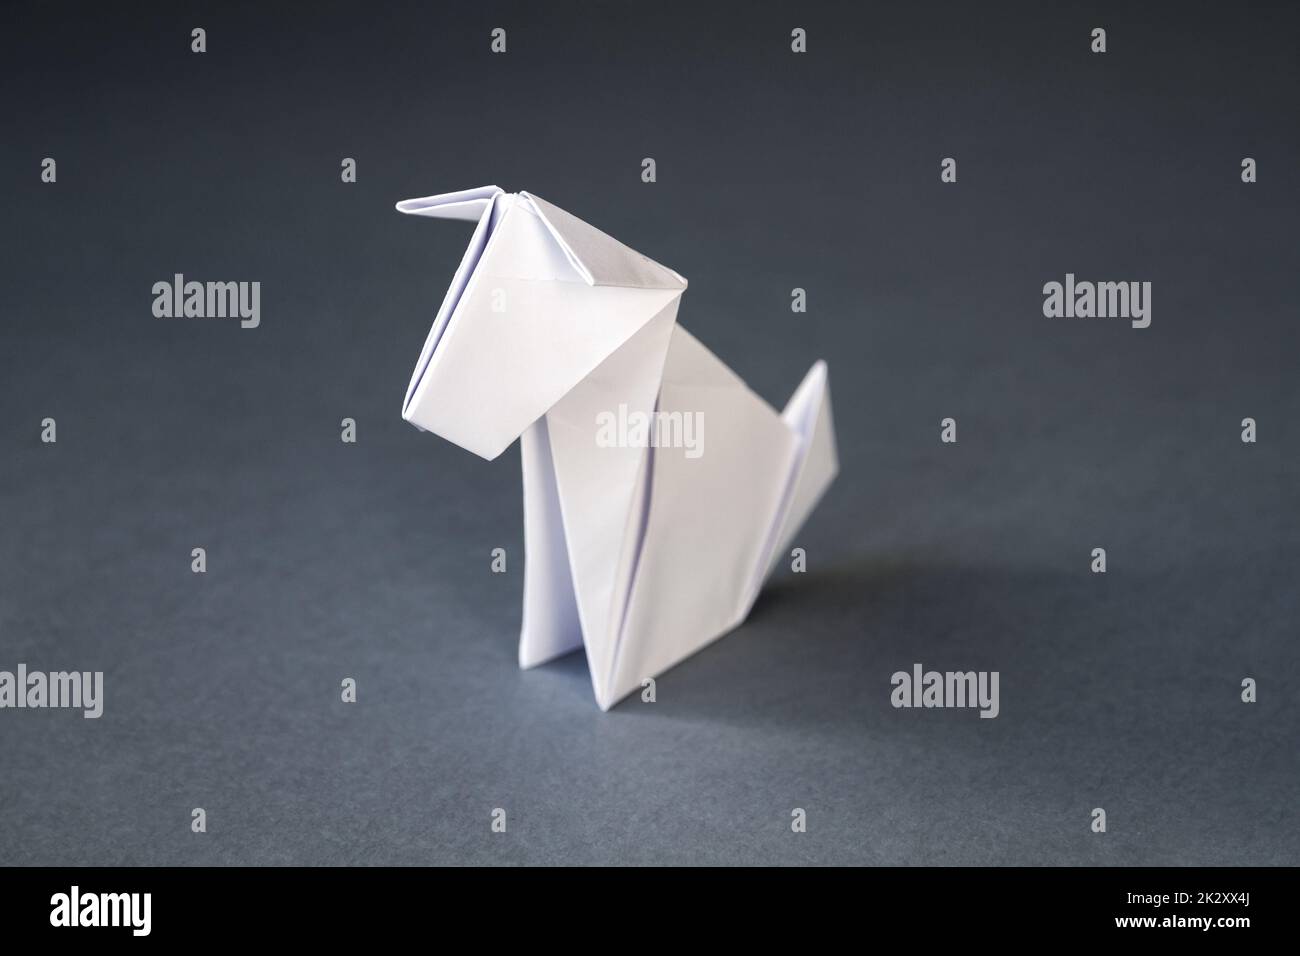 White paper dog origami isolated on a grey background Stock Photo